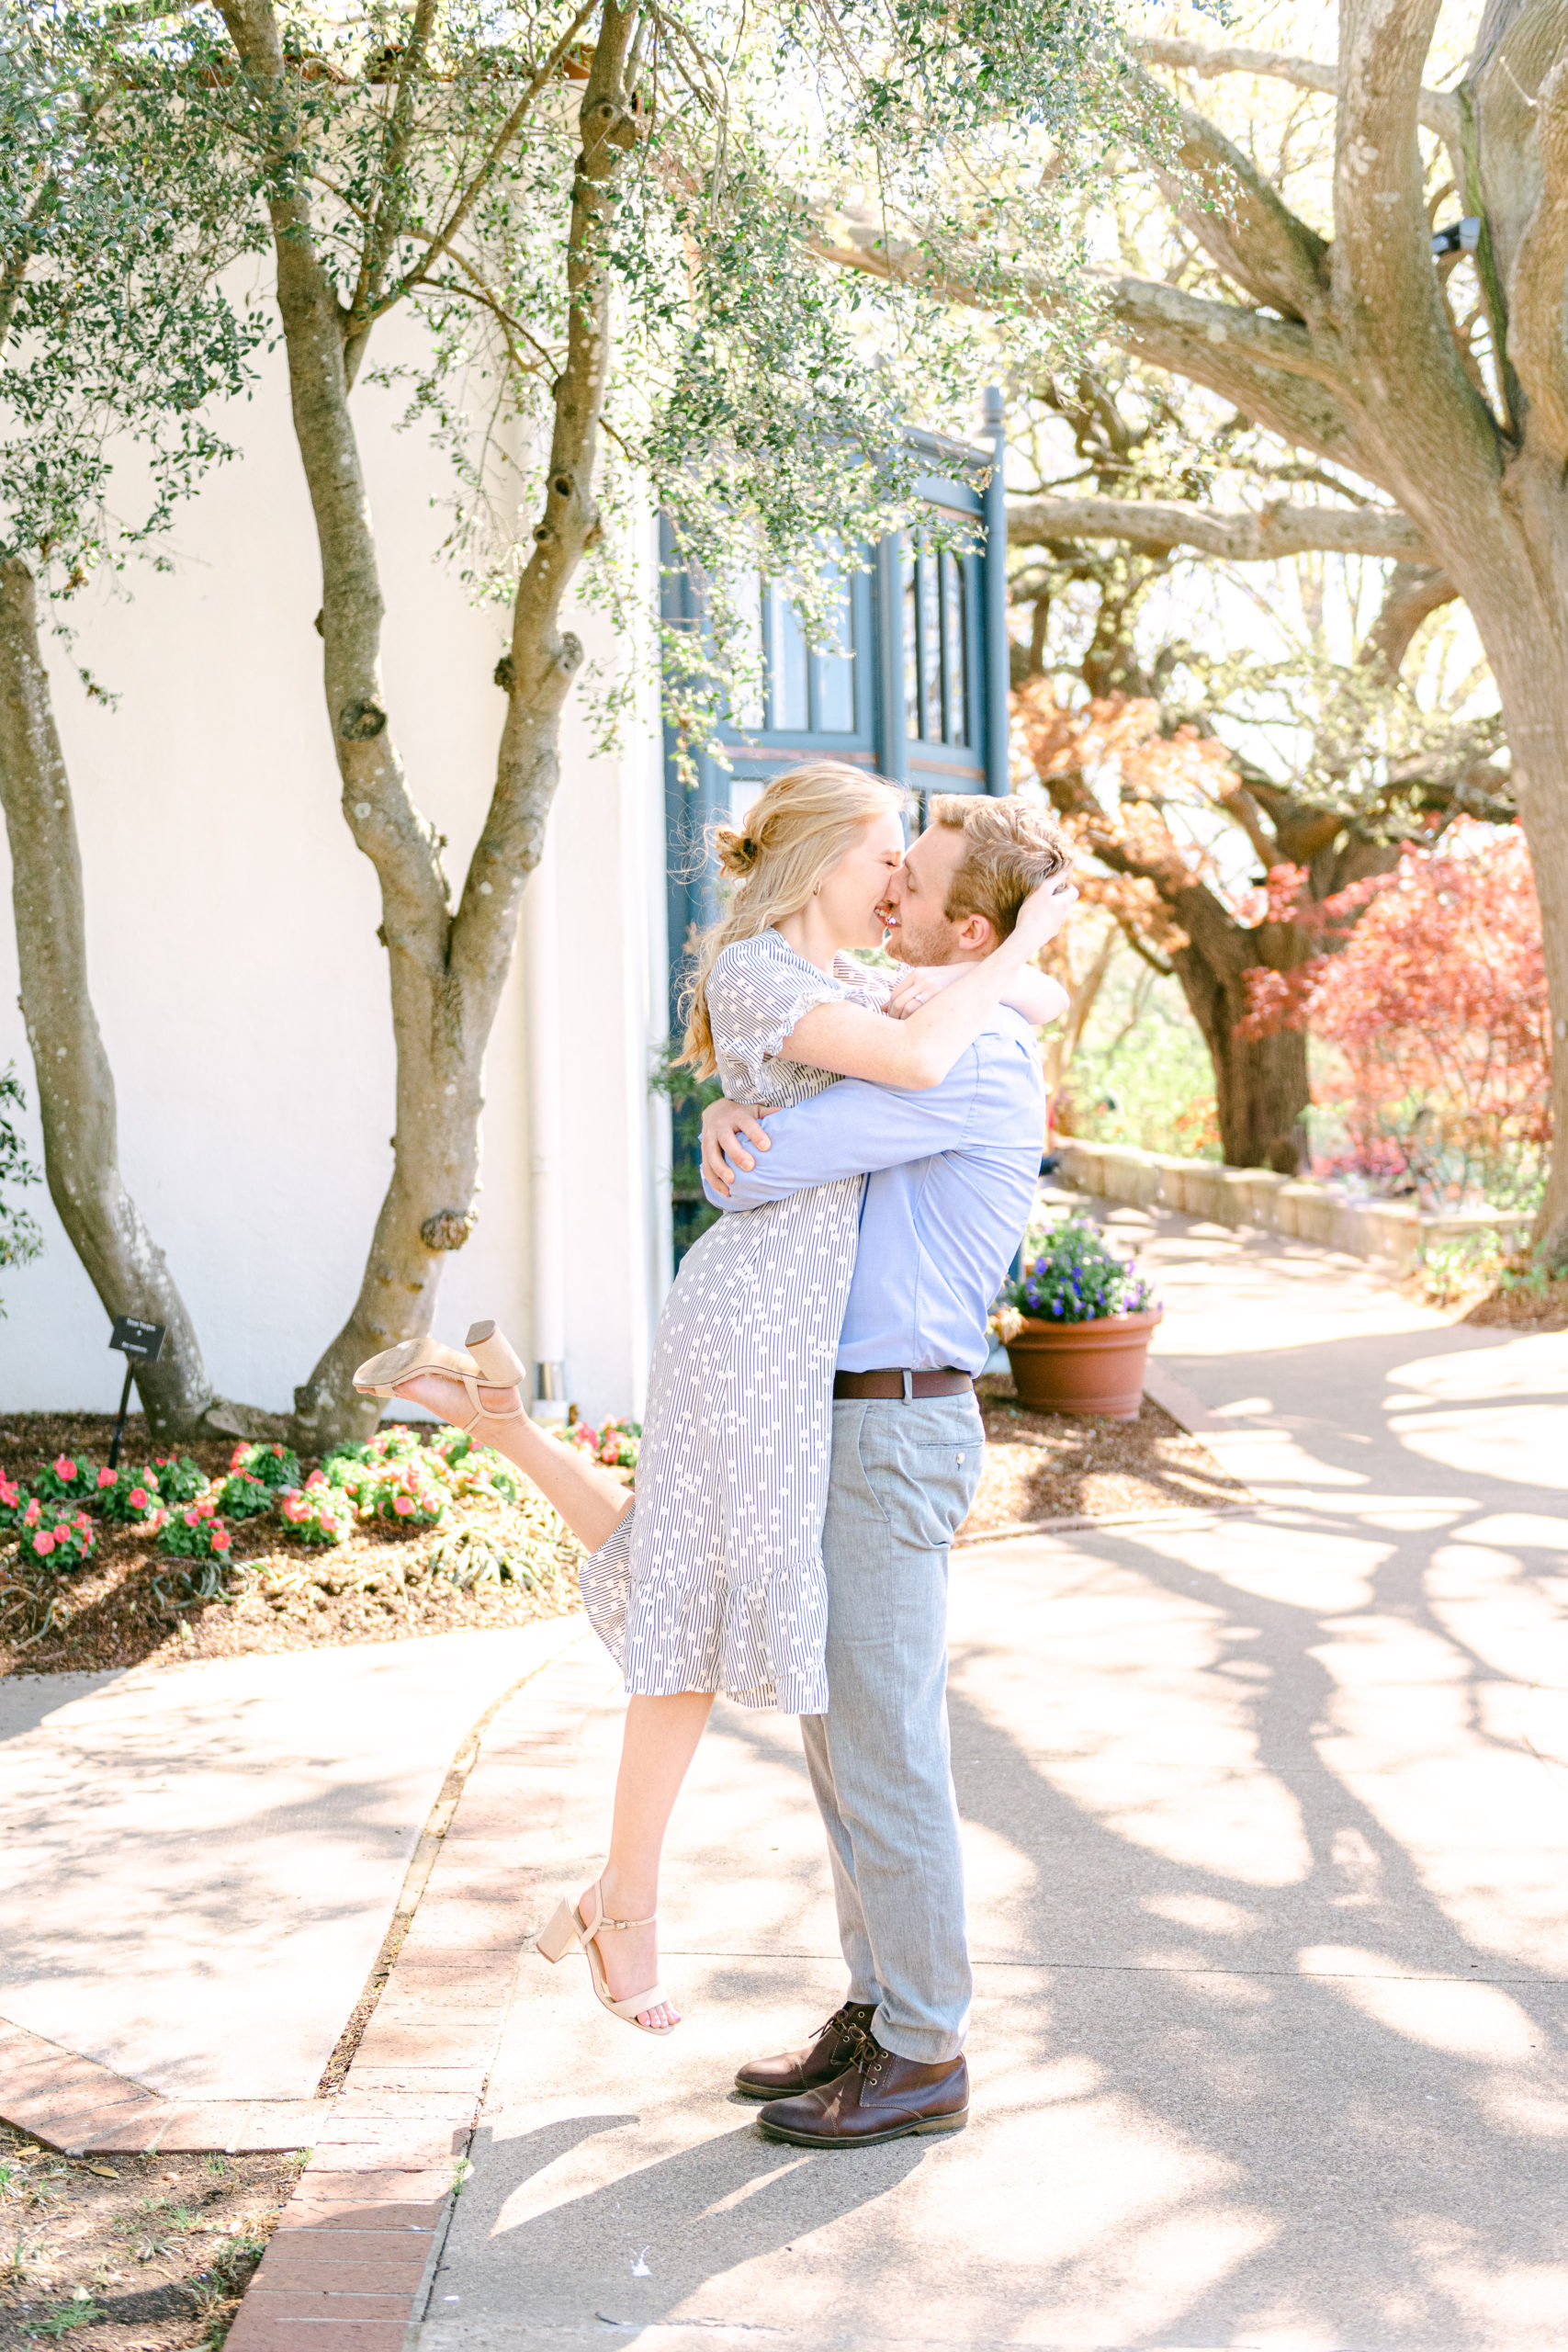 Dallas Arboretum Engagement Session with Carley Ann Photography